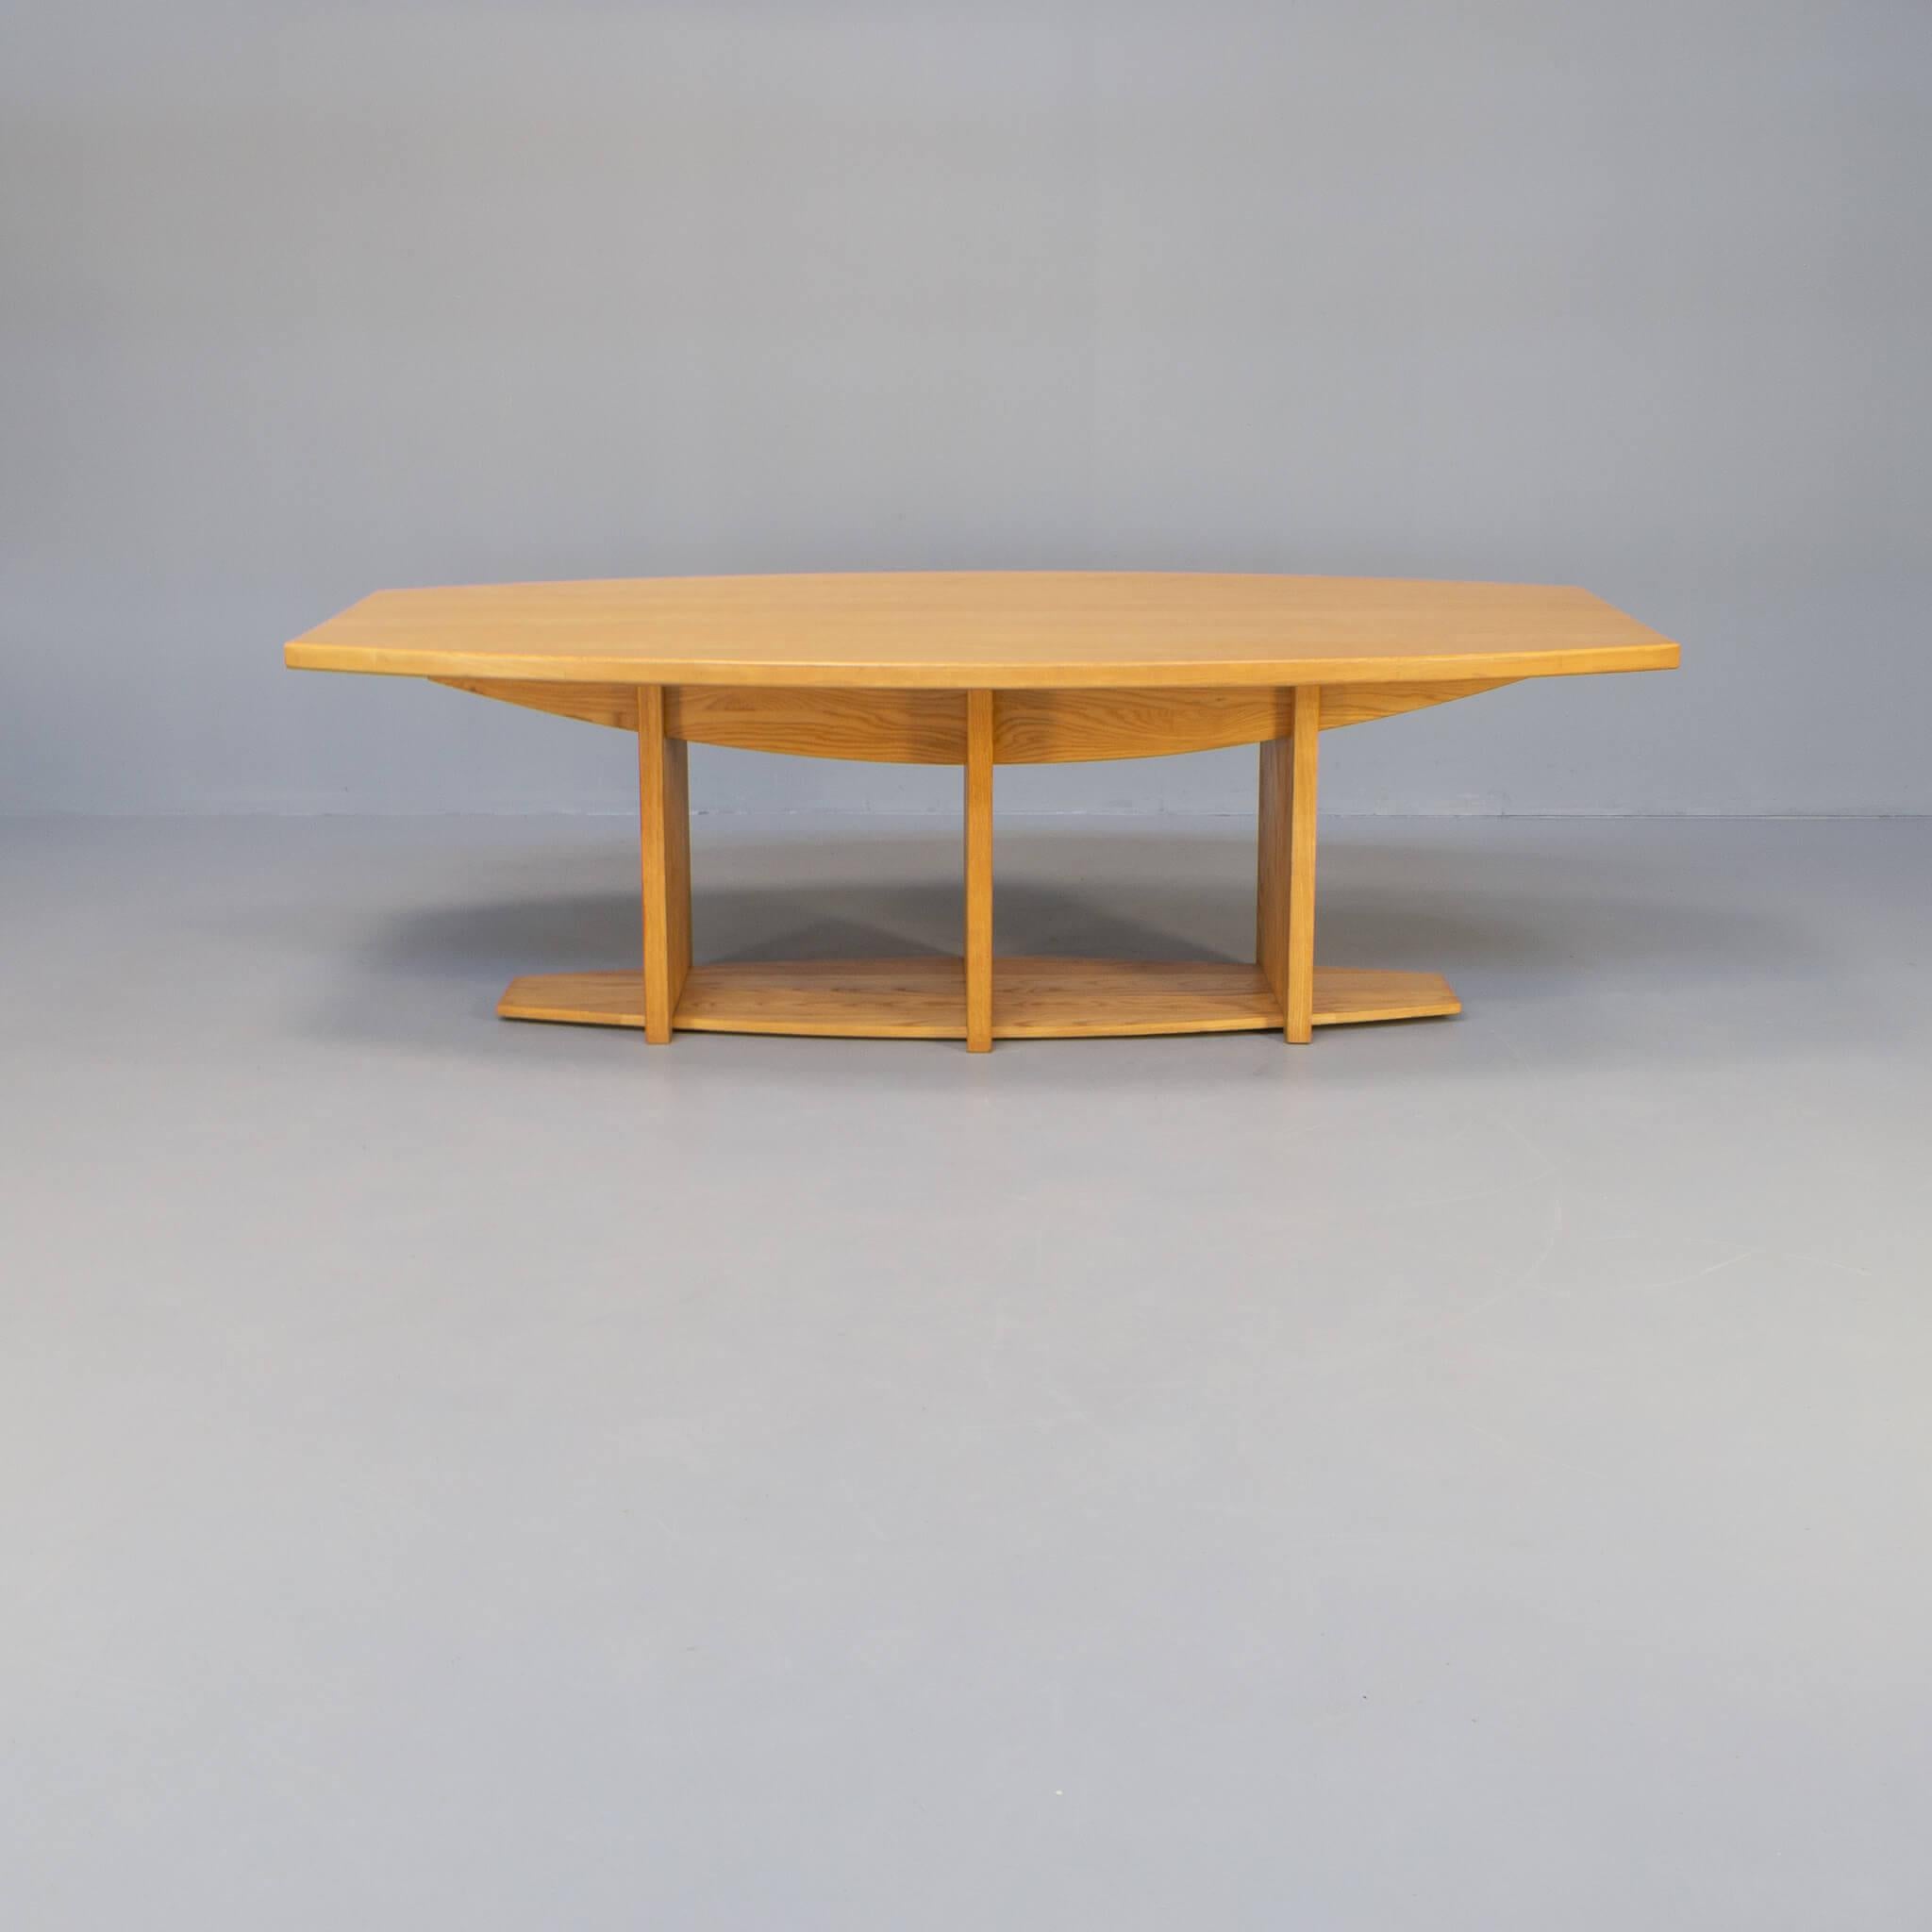 Ash wood is a desirable wood structure. Fresh, friendly and luxury. This table has a slight oval form and is architectural developed for in house use of a private collectioneer. The table easily fits 4 chairs at the long side so a set of 8 chairs is